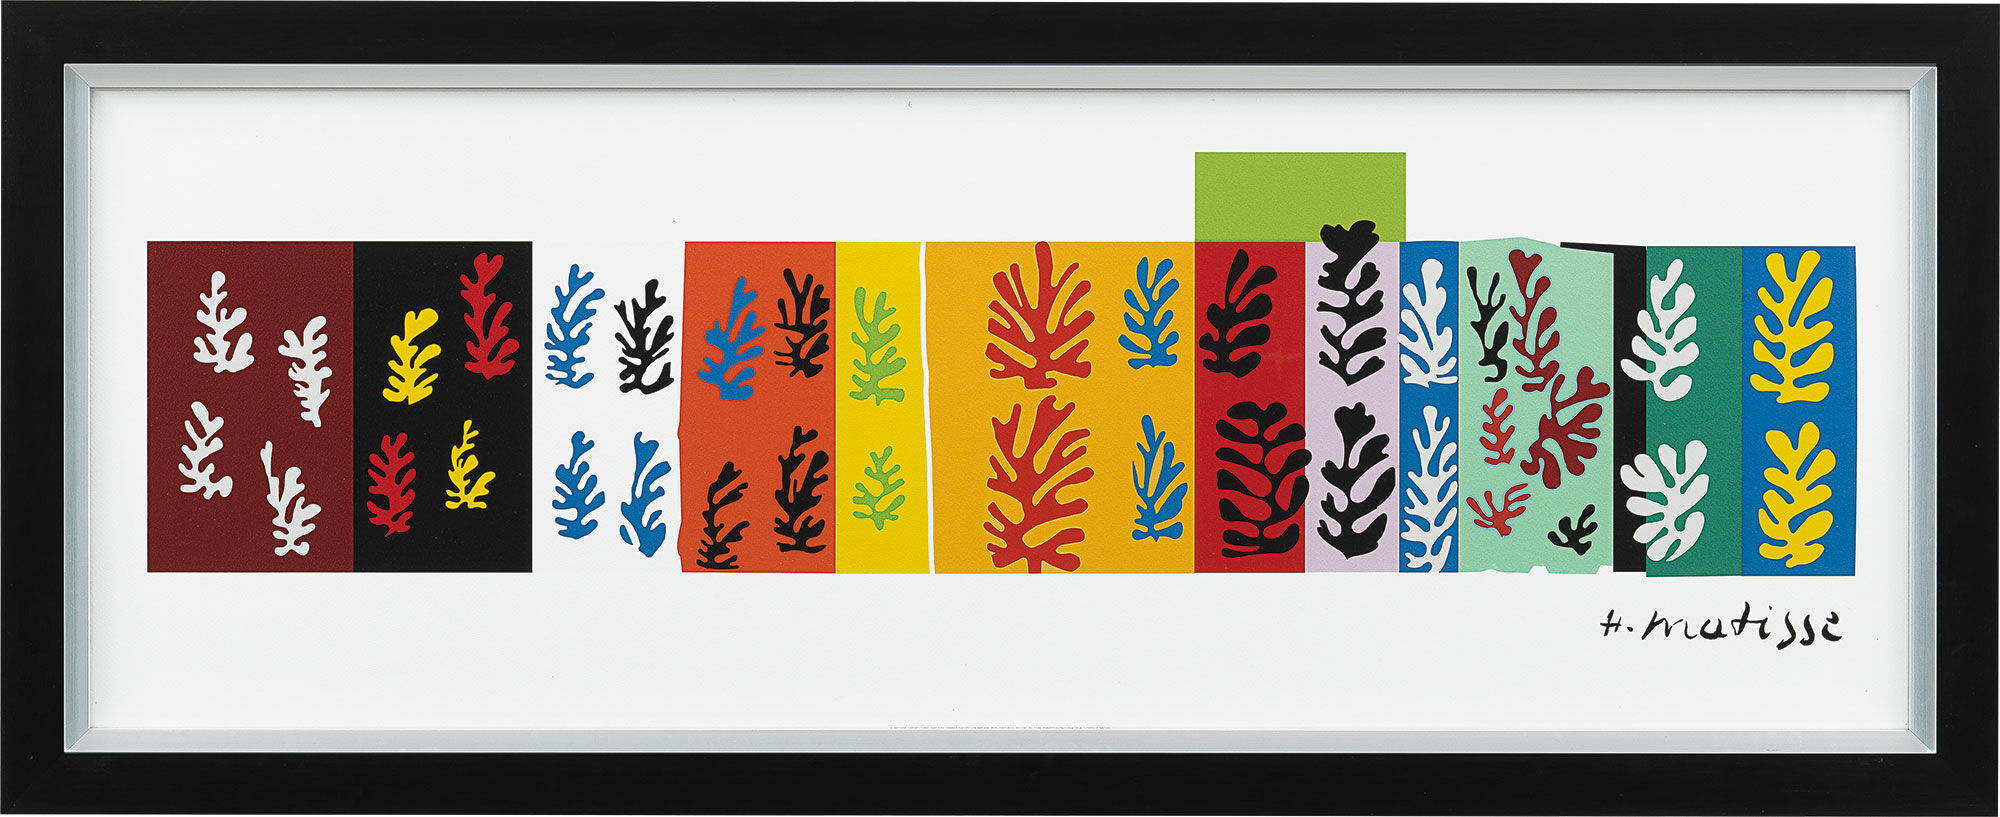 Picture "Les Velours" (1947), framed by Henri Matisse